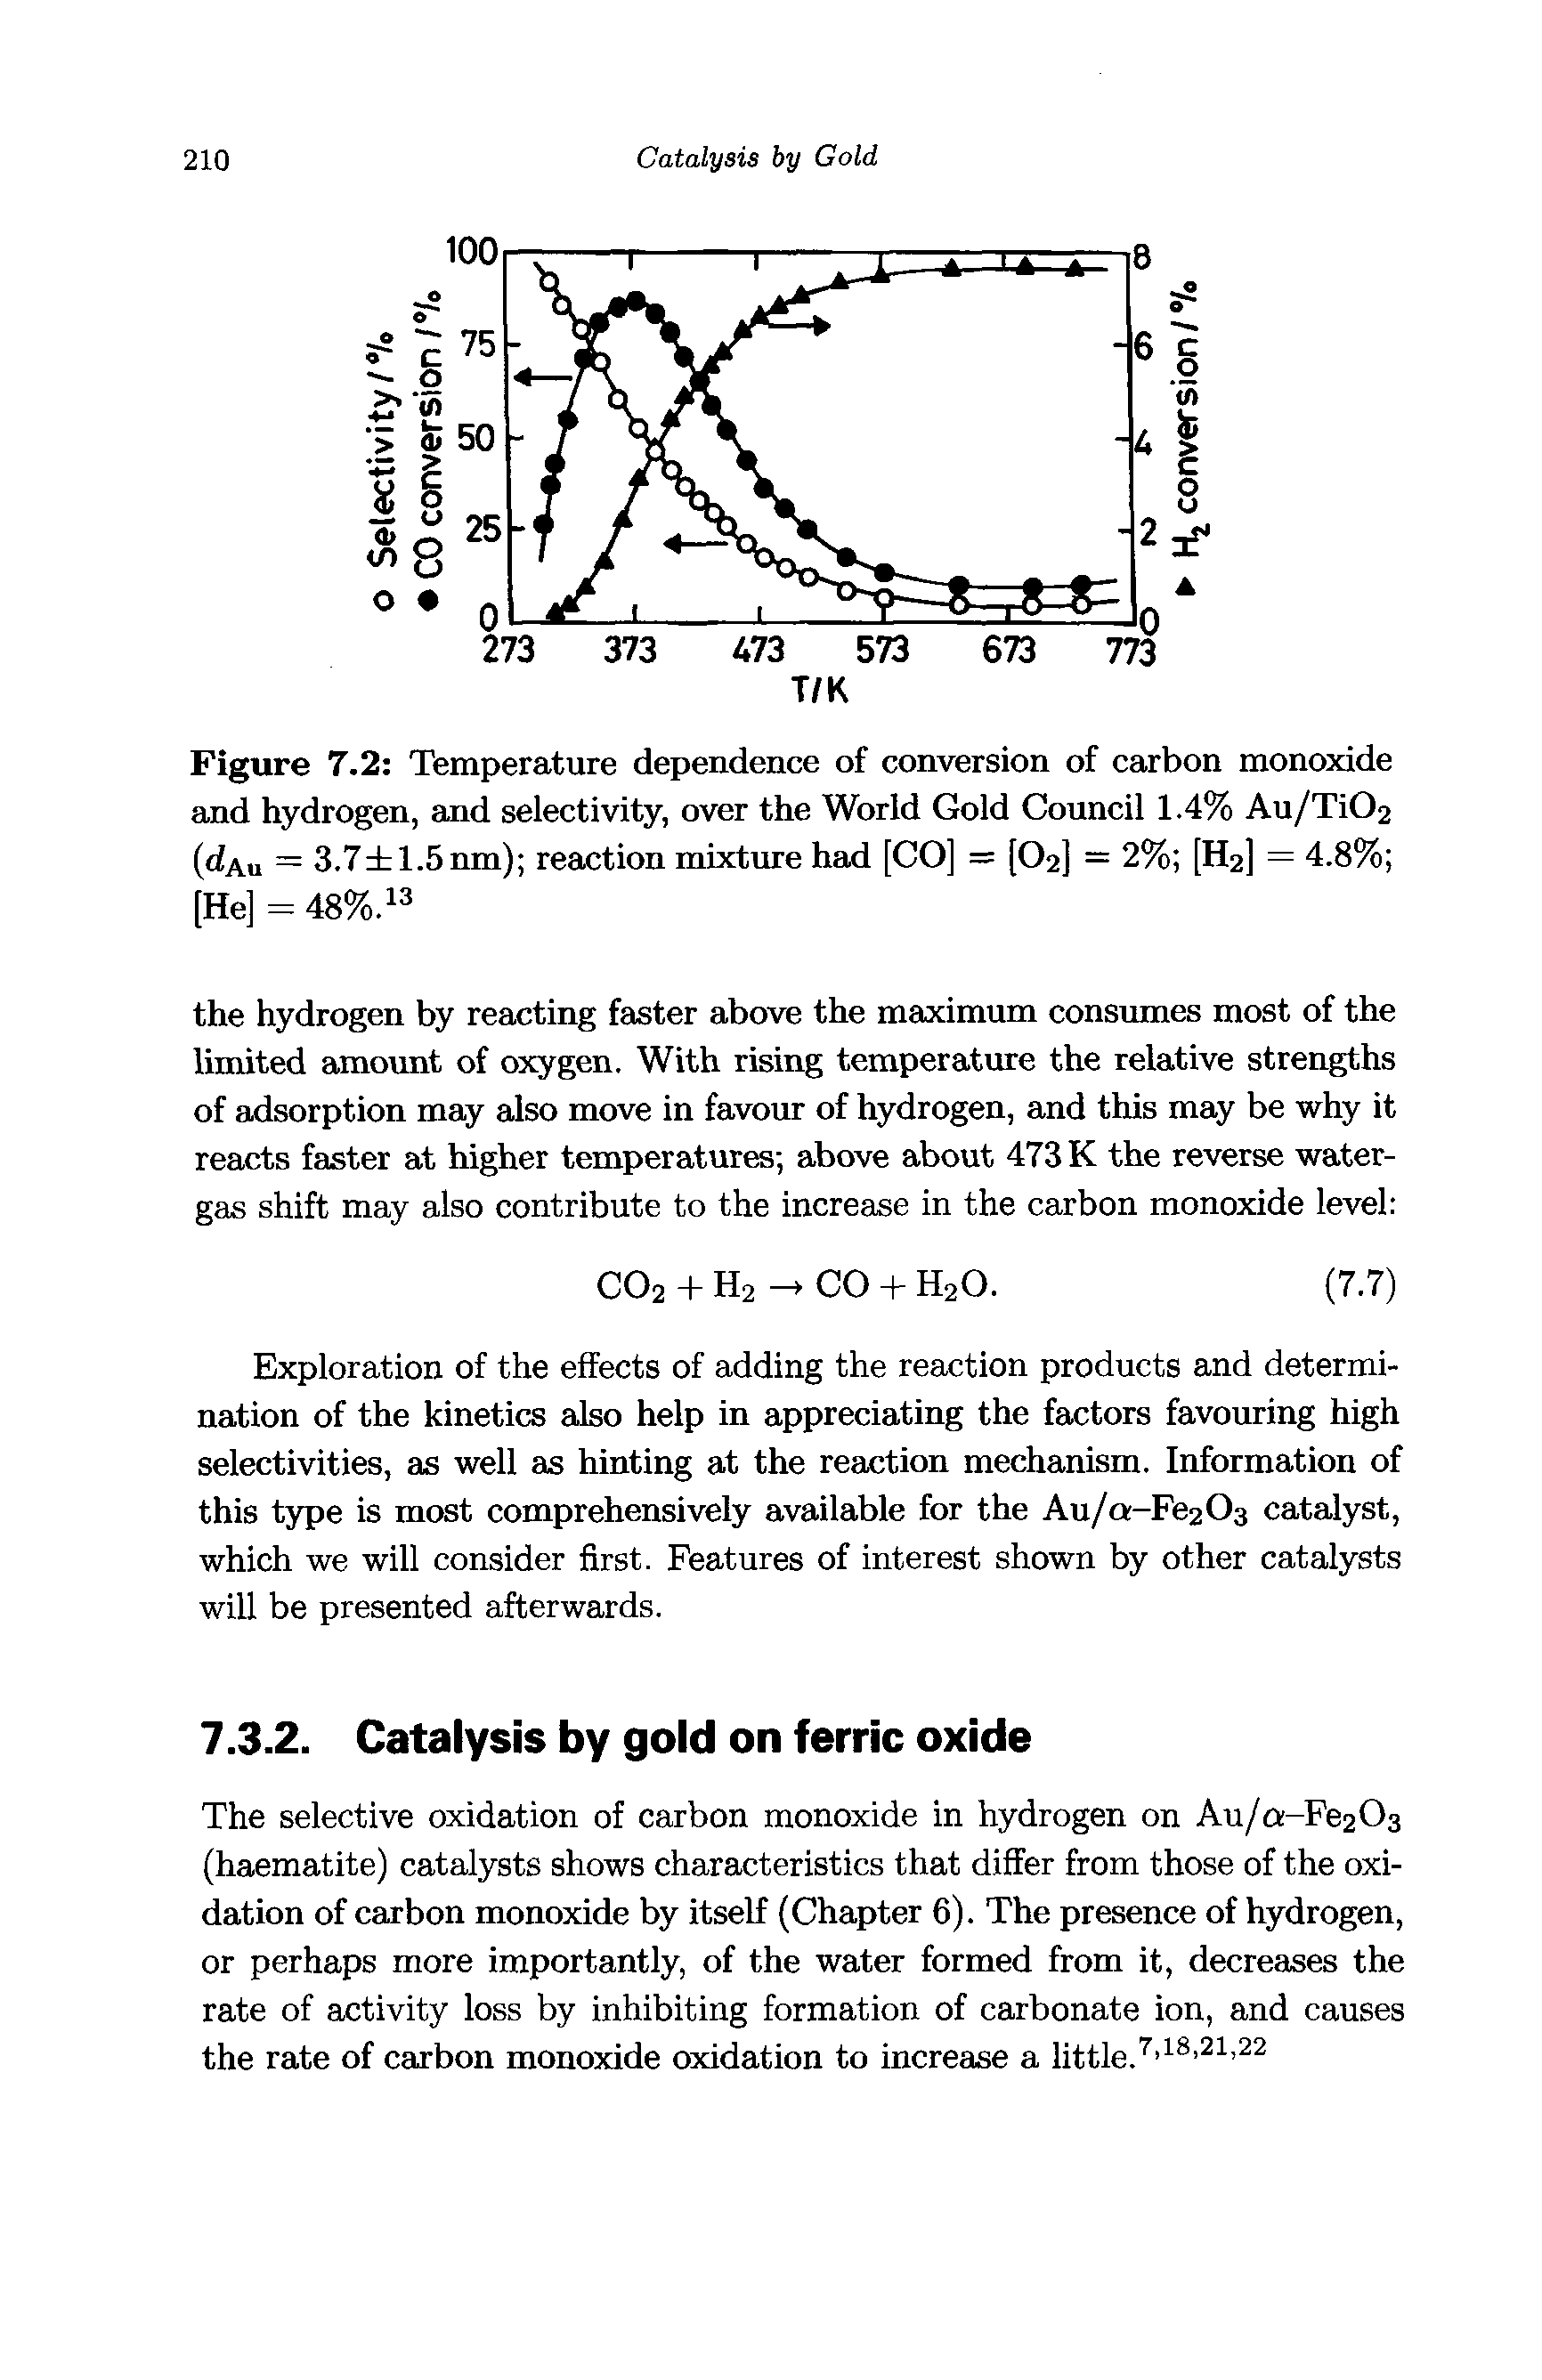 Figure 7.2 Temperature dependence of conversion of carbon monoxide and hydrogen, and selectivity, over the World Gold Council 1.4% Au/Ti02 (dAu = 3.7 1.5nm) reaction mixture had [CO] = [O2] = 2% [H2] = 4.8% [He] = 48%.13...